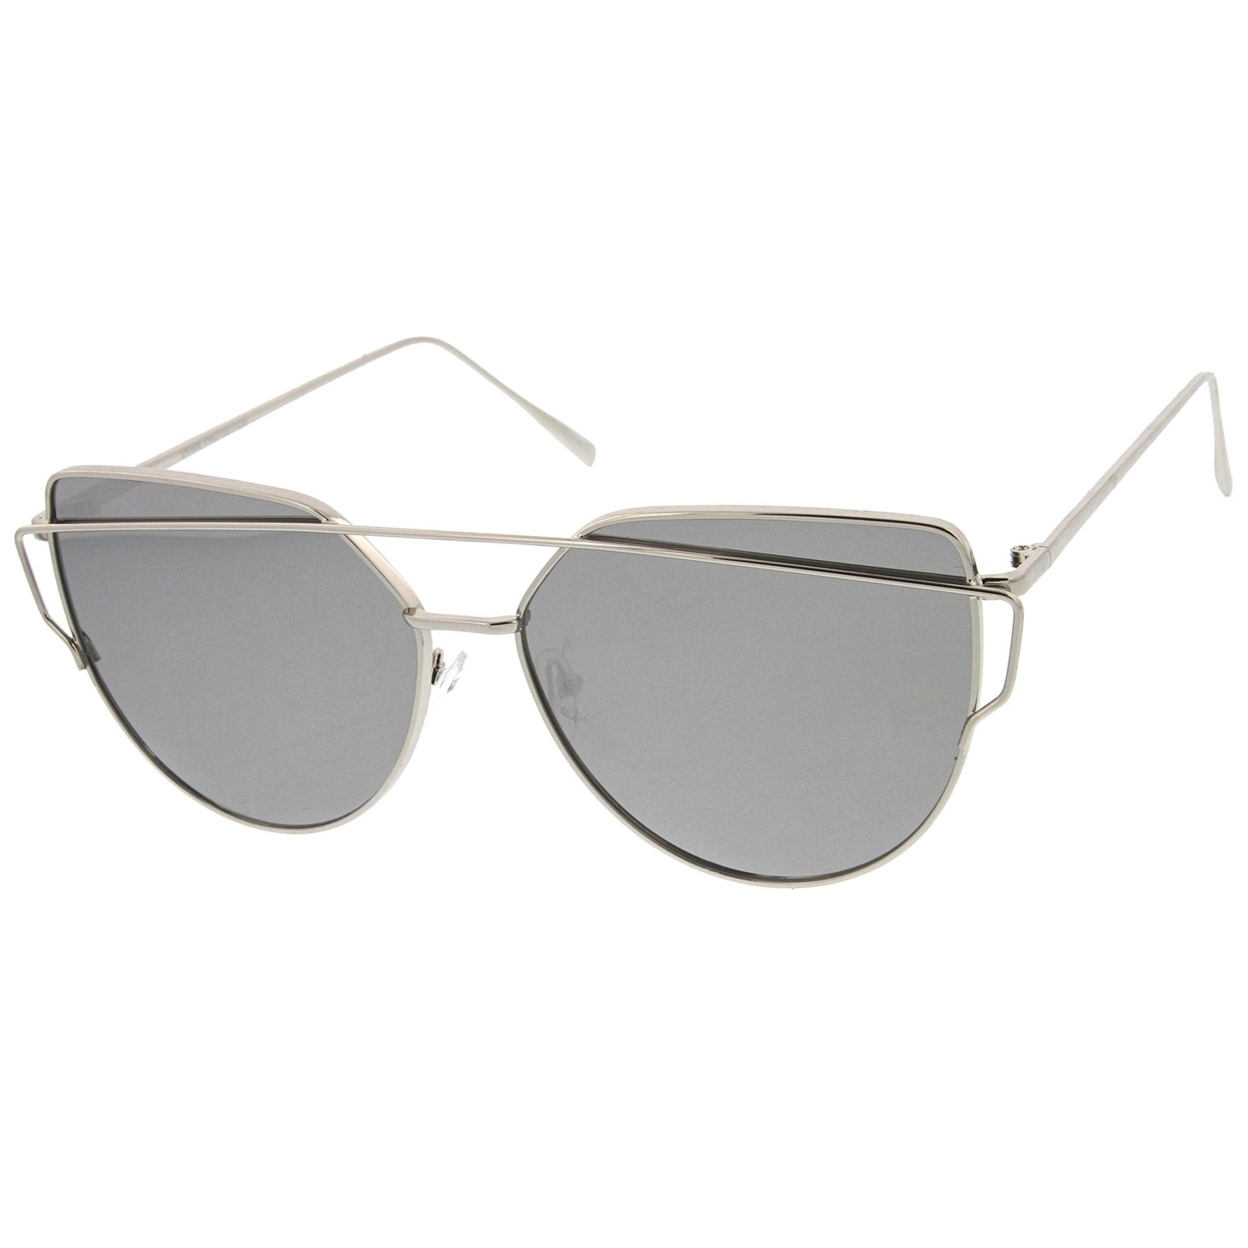 Oversize Metal Frame Thin Temple Color Mirror Flat Lens Aviator Sunglasses 62mm - Gold / Blue Mirror